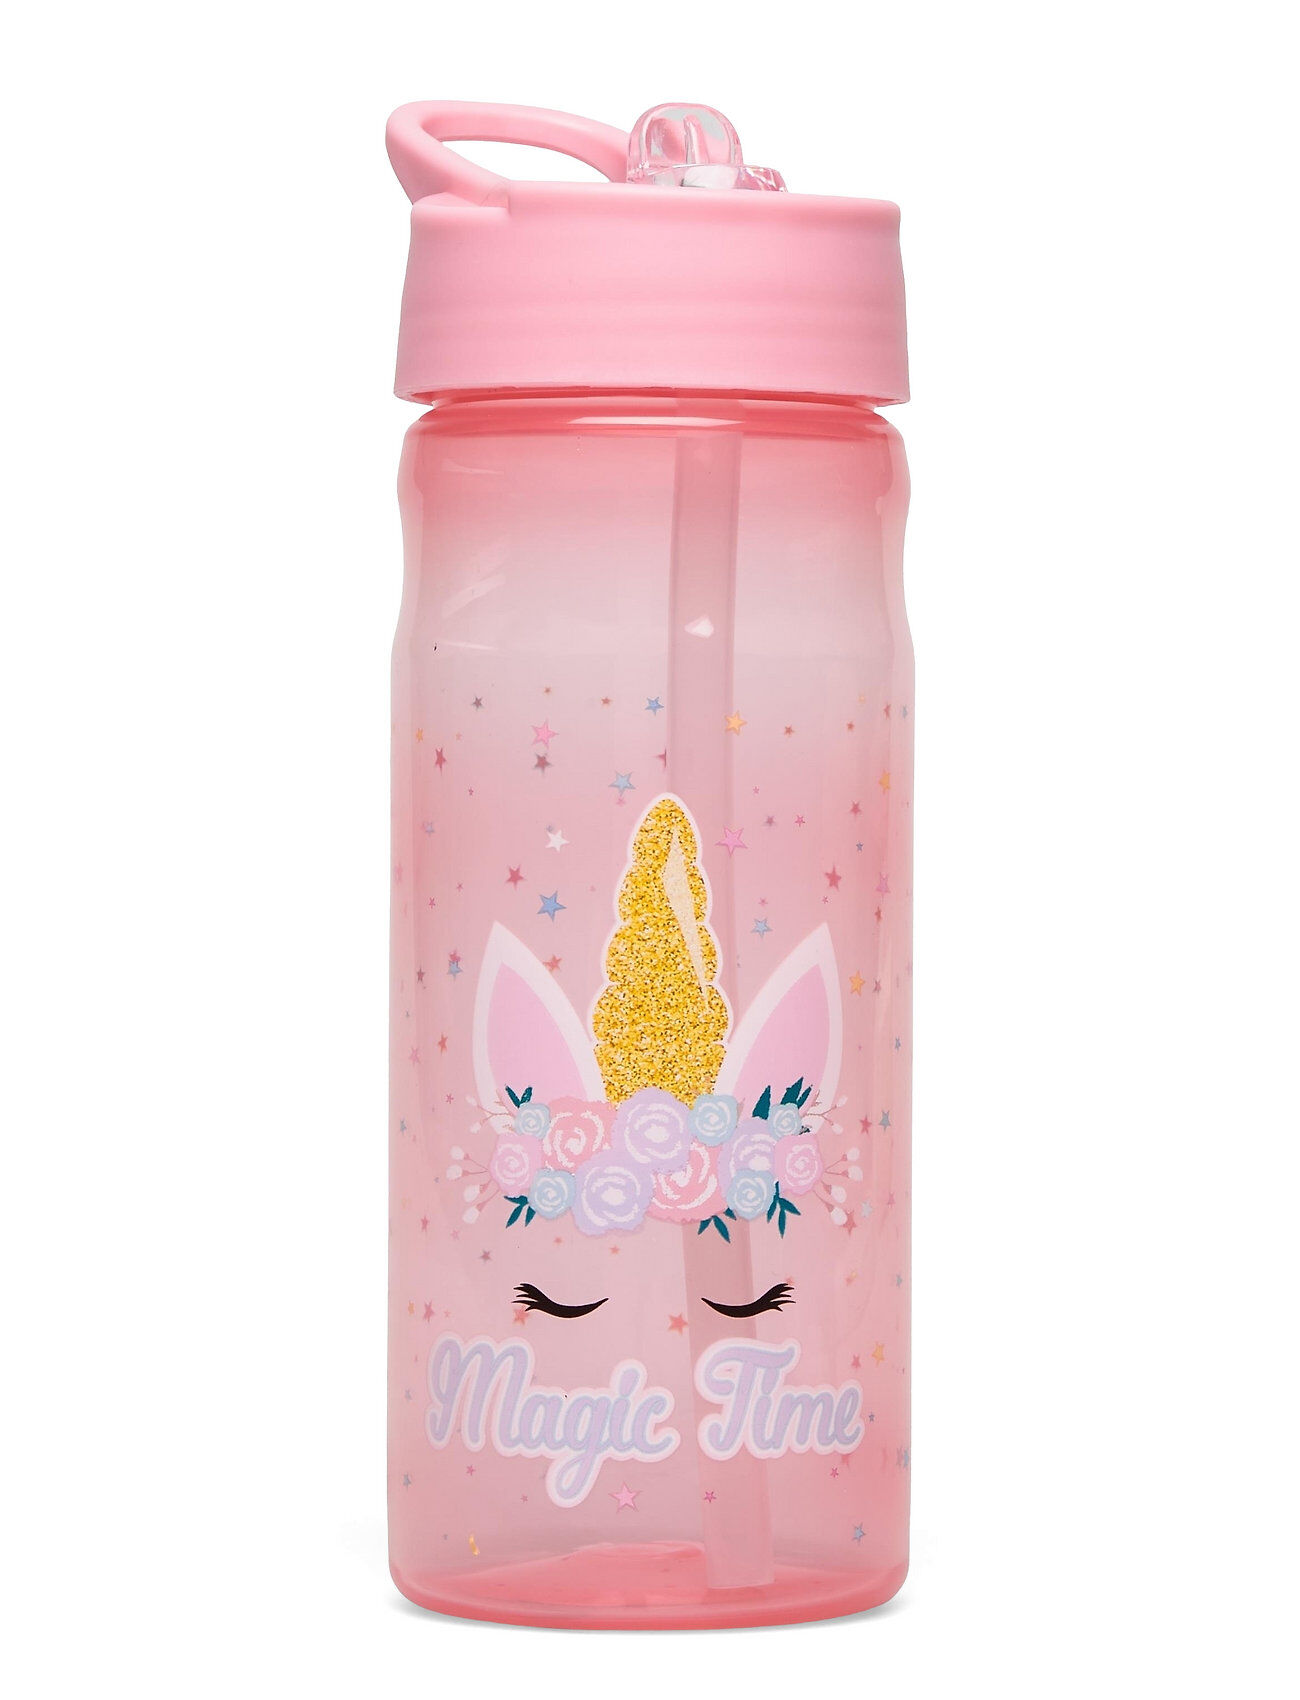 Euromic Unicorn Magical Flower Water Bottle Home Meal Time Water Bottles Rosa Euromic